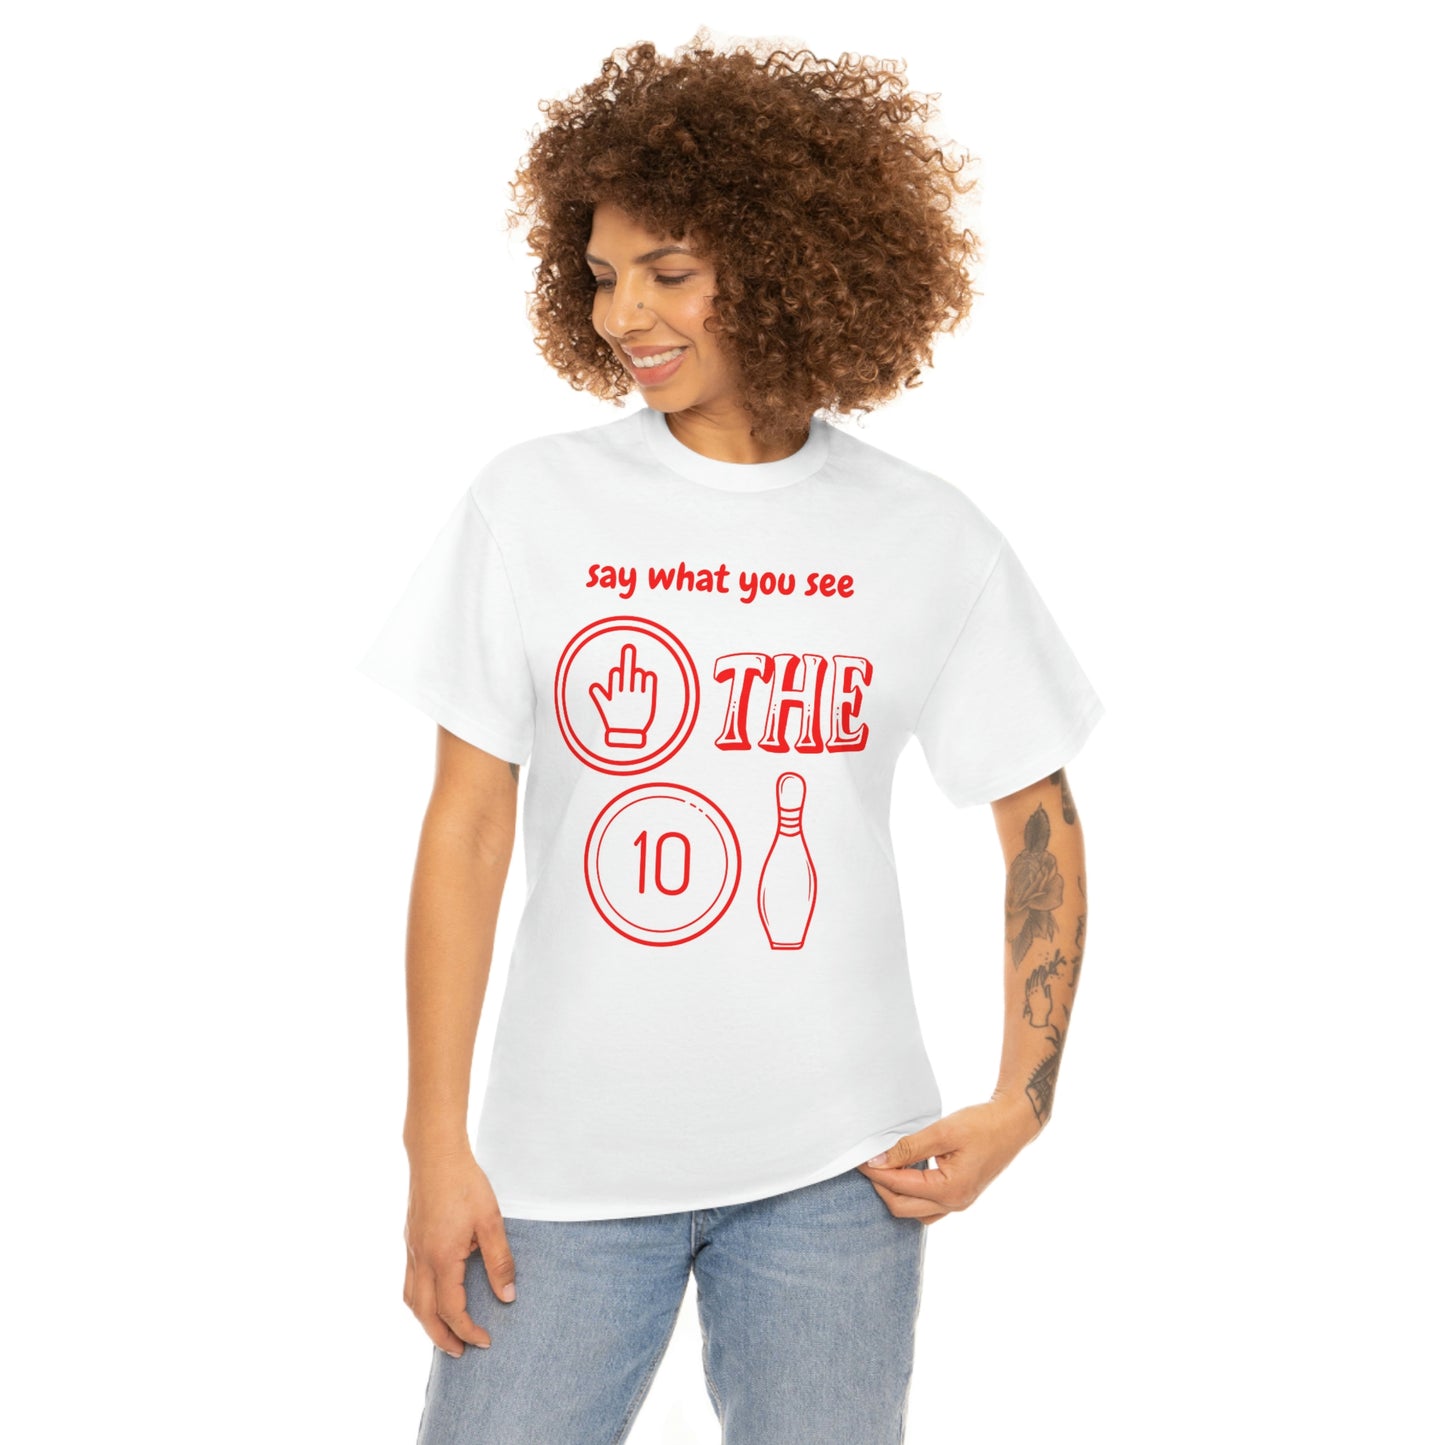 Say What You See Tee